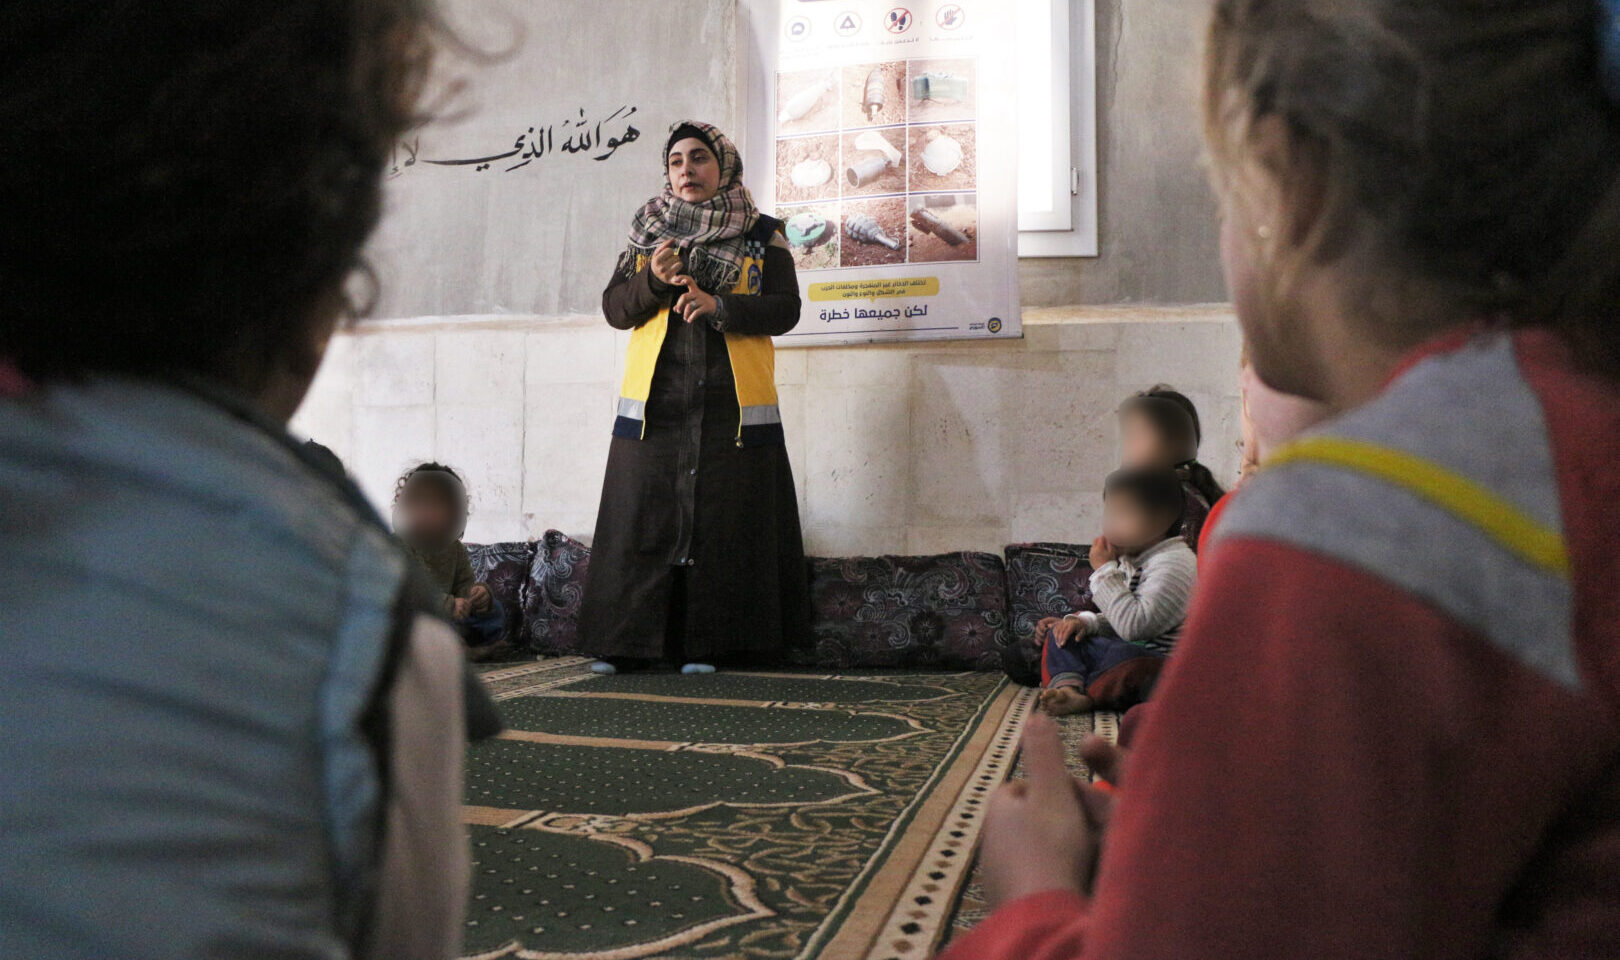 A woman in a headscarf speaks to children sitting on a floor.